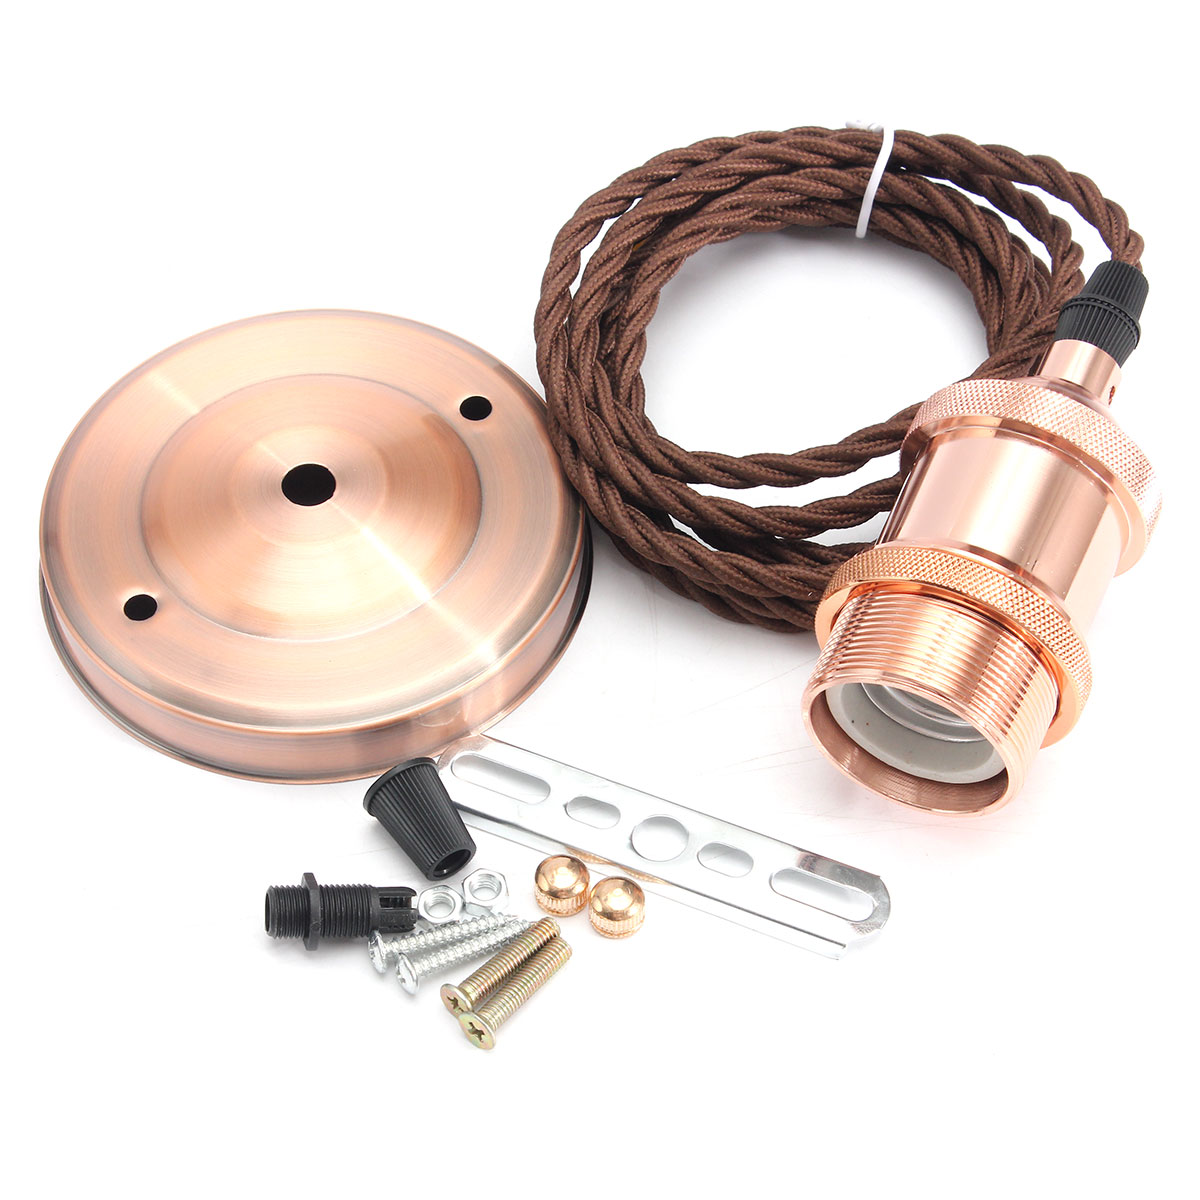 KINGSO 110V-220V 600W Vintage Lamp Holder Ceiling Canopy and Copper Socket with 2M Wire